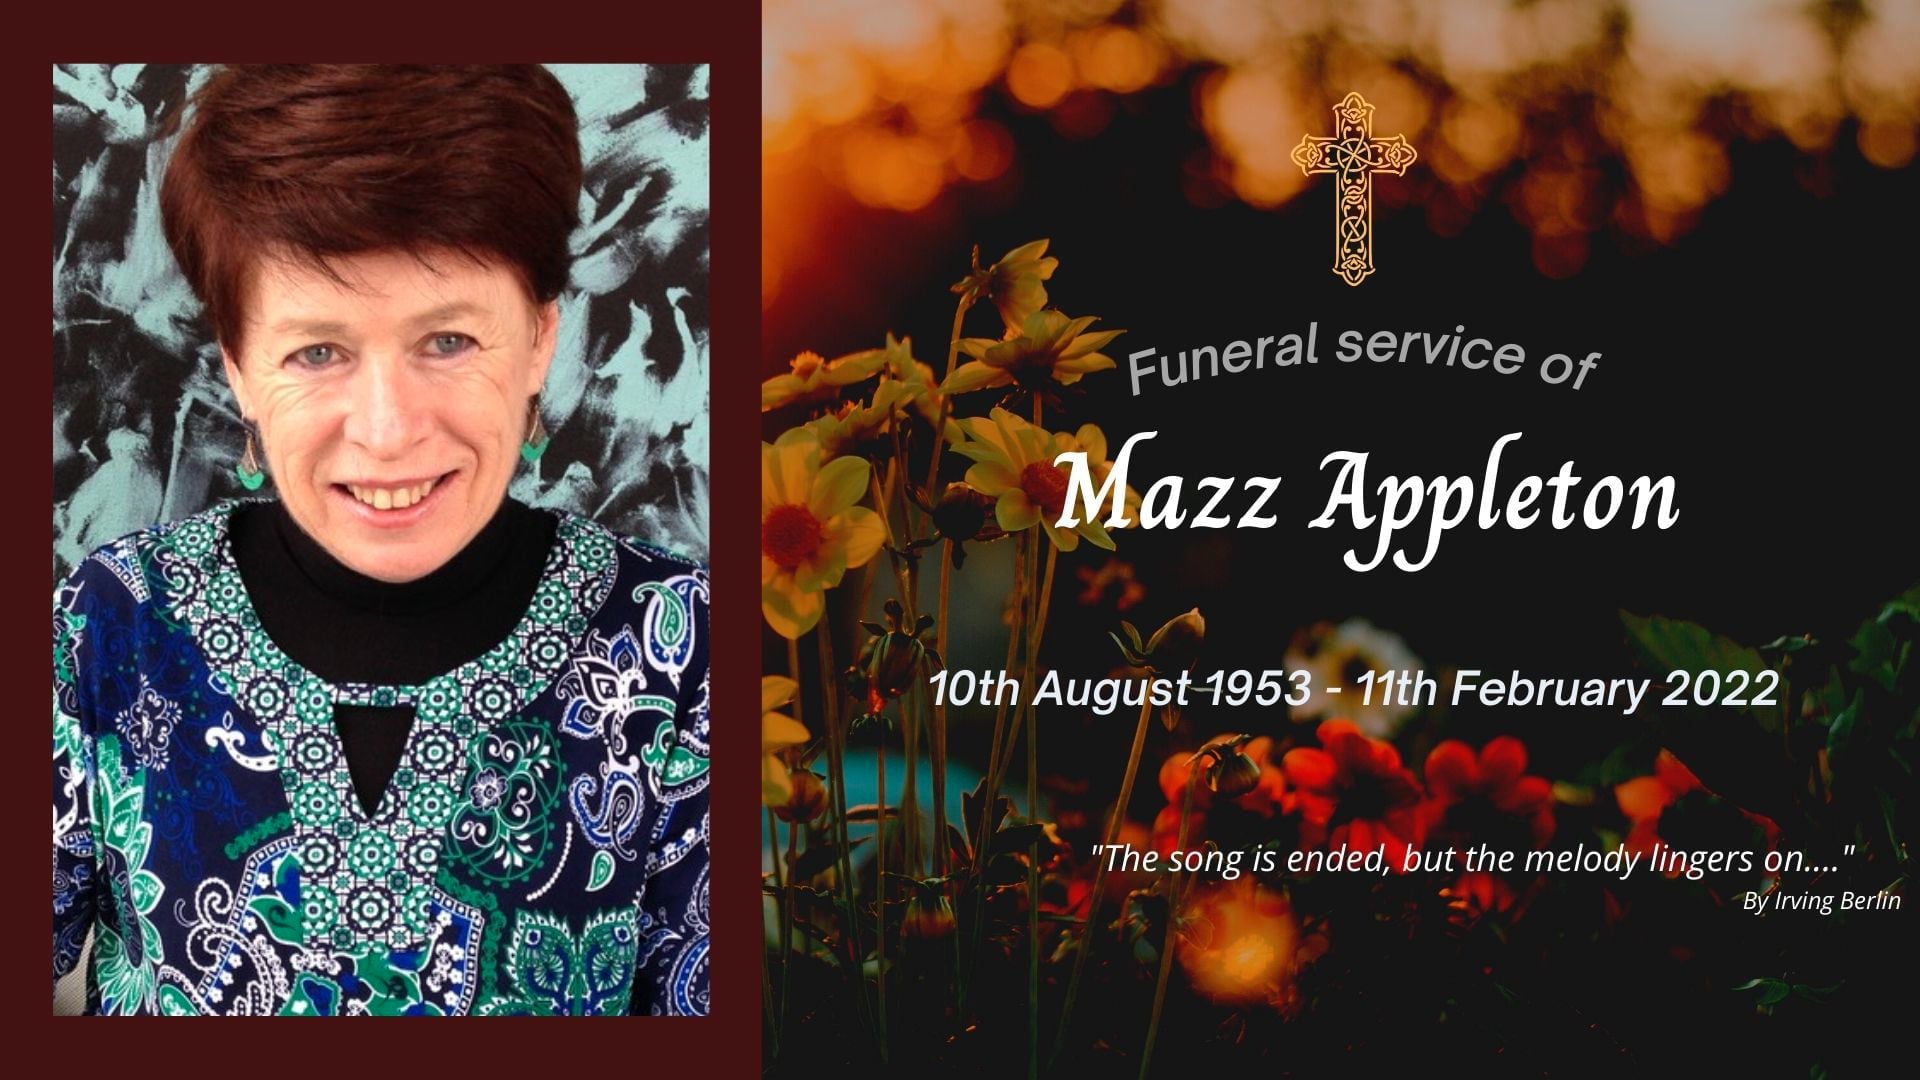 Funeral service of the late Mazz Appleton